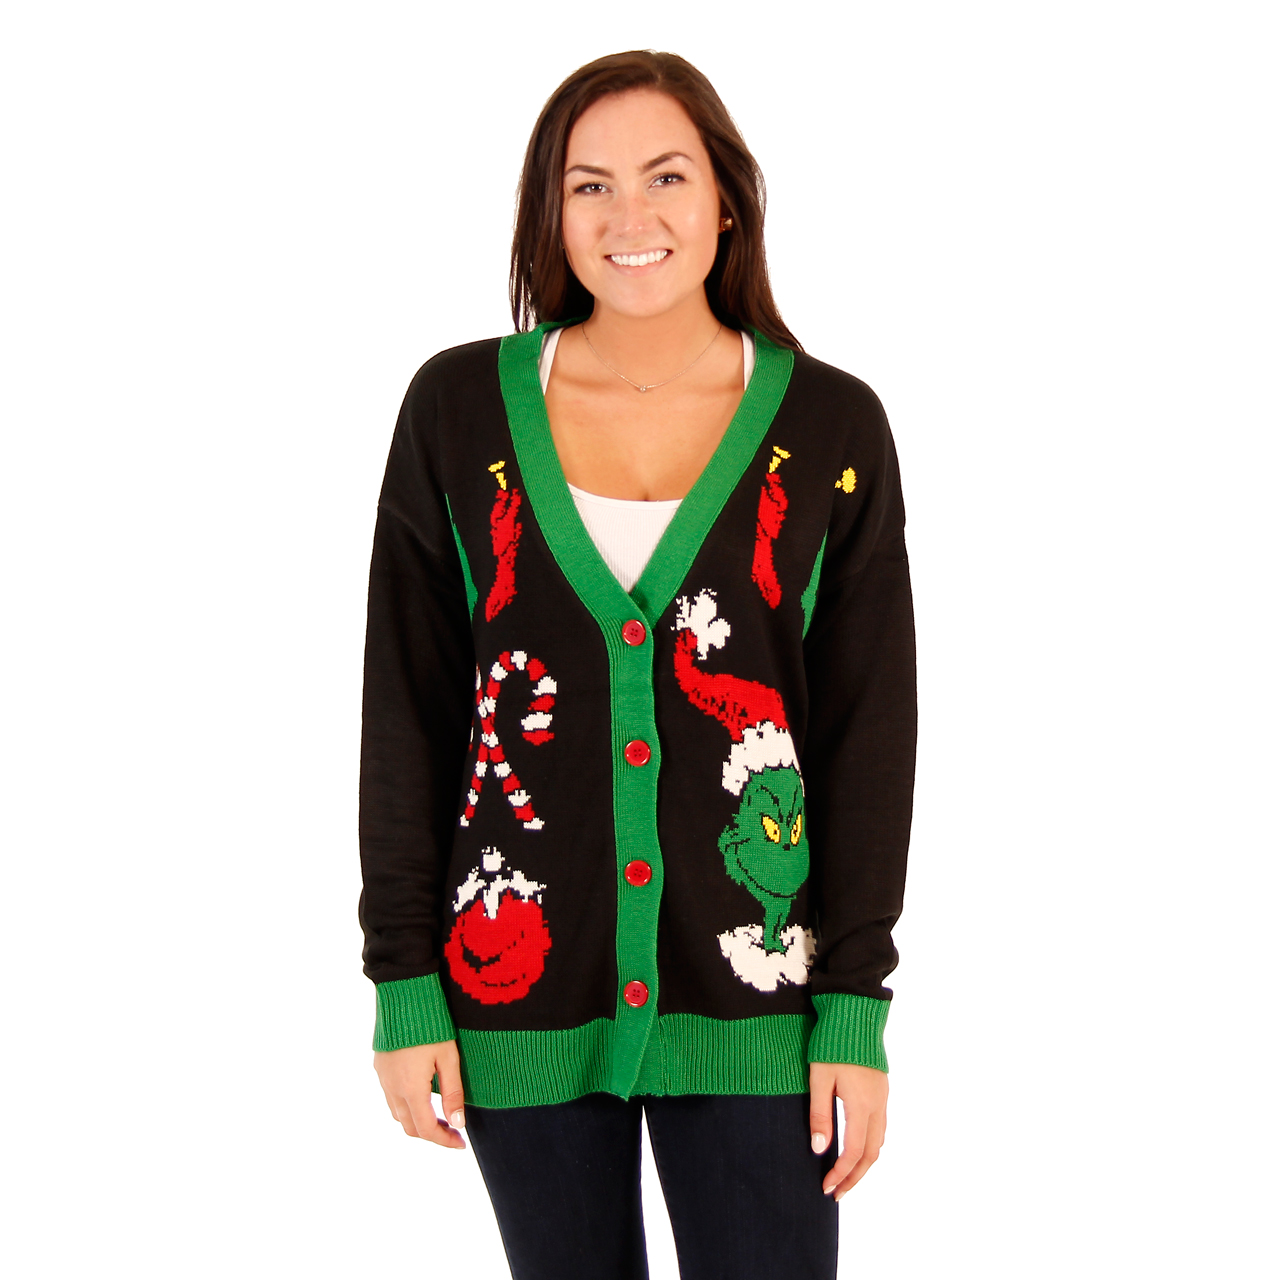 Women’s The Grinch Ugly Christmas Cardigan Sweater,Ugly Christmas Sweaters | Funny Xmas Sweaters for Men and Women